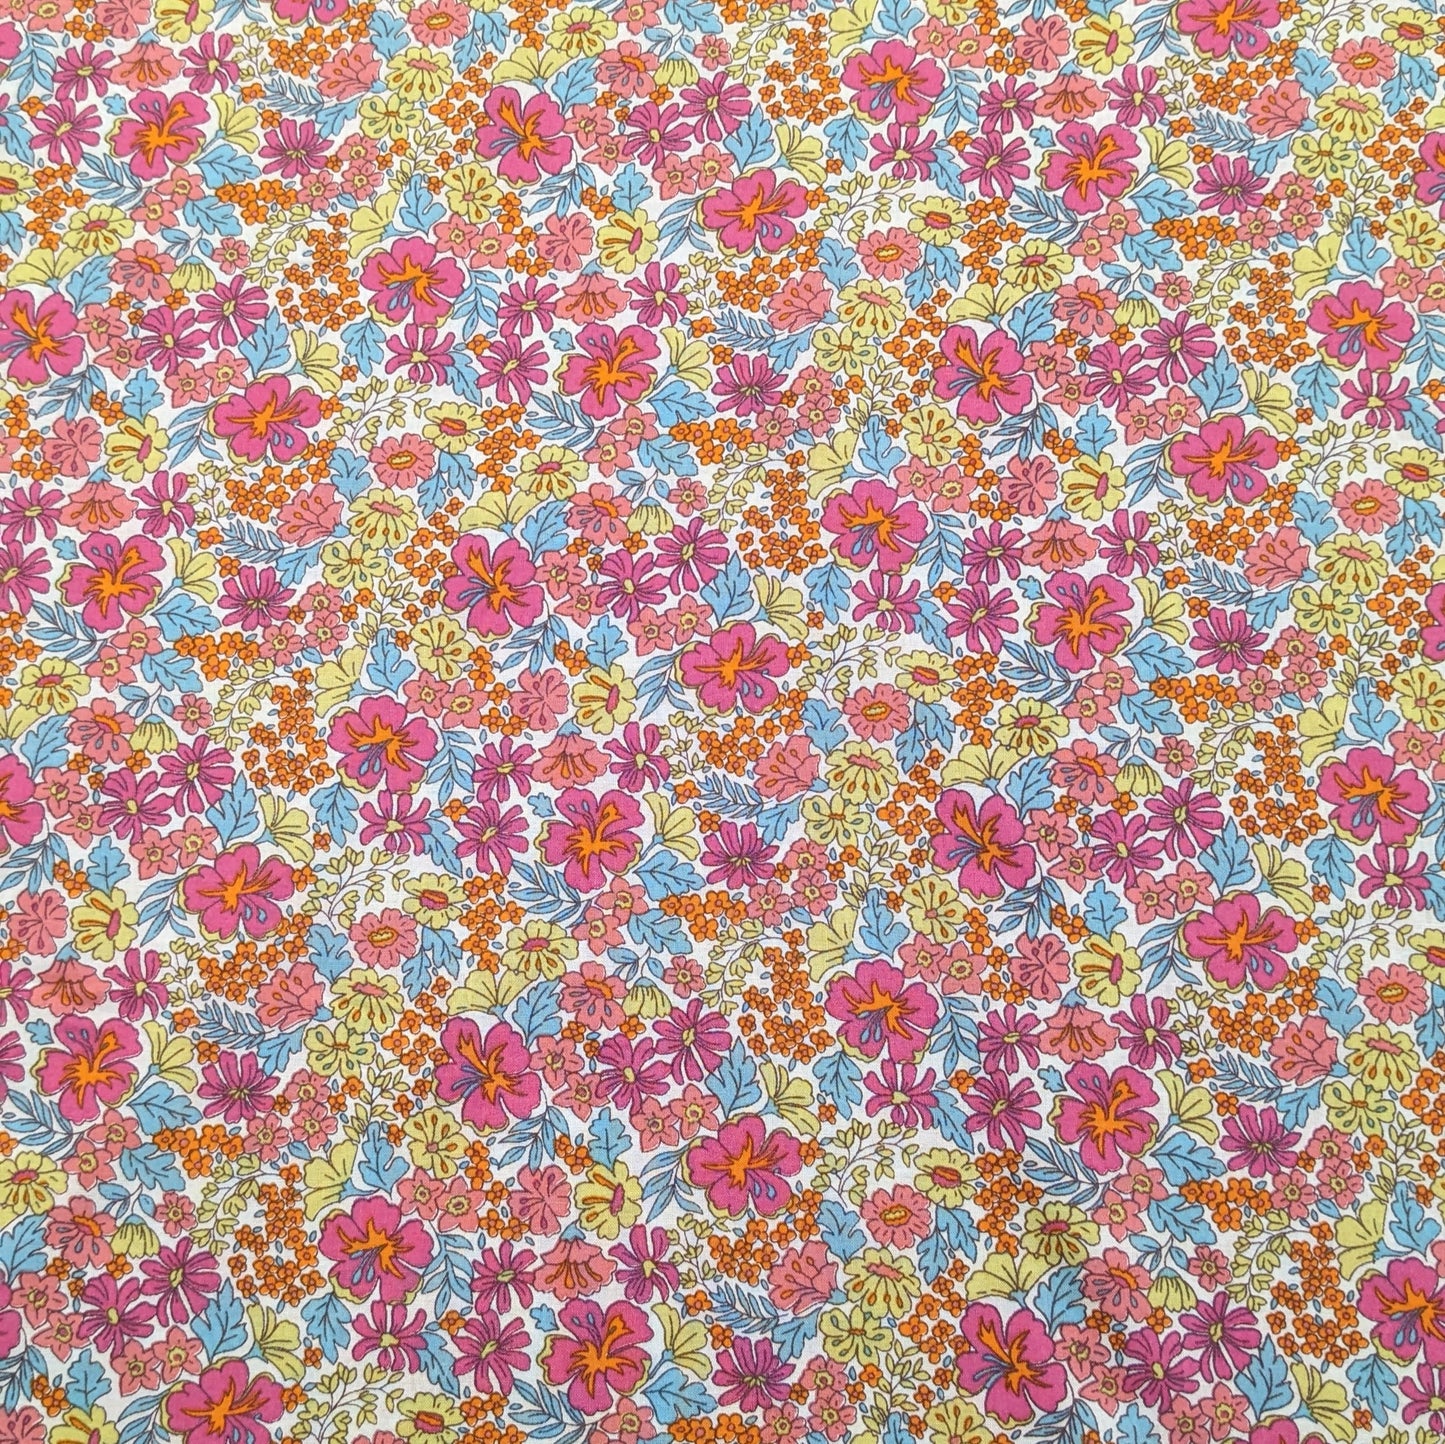 Cotton Lawn Fabric – Candy Floral - Pink